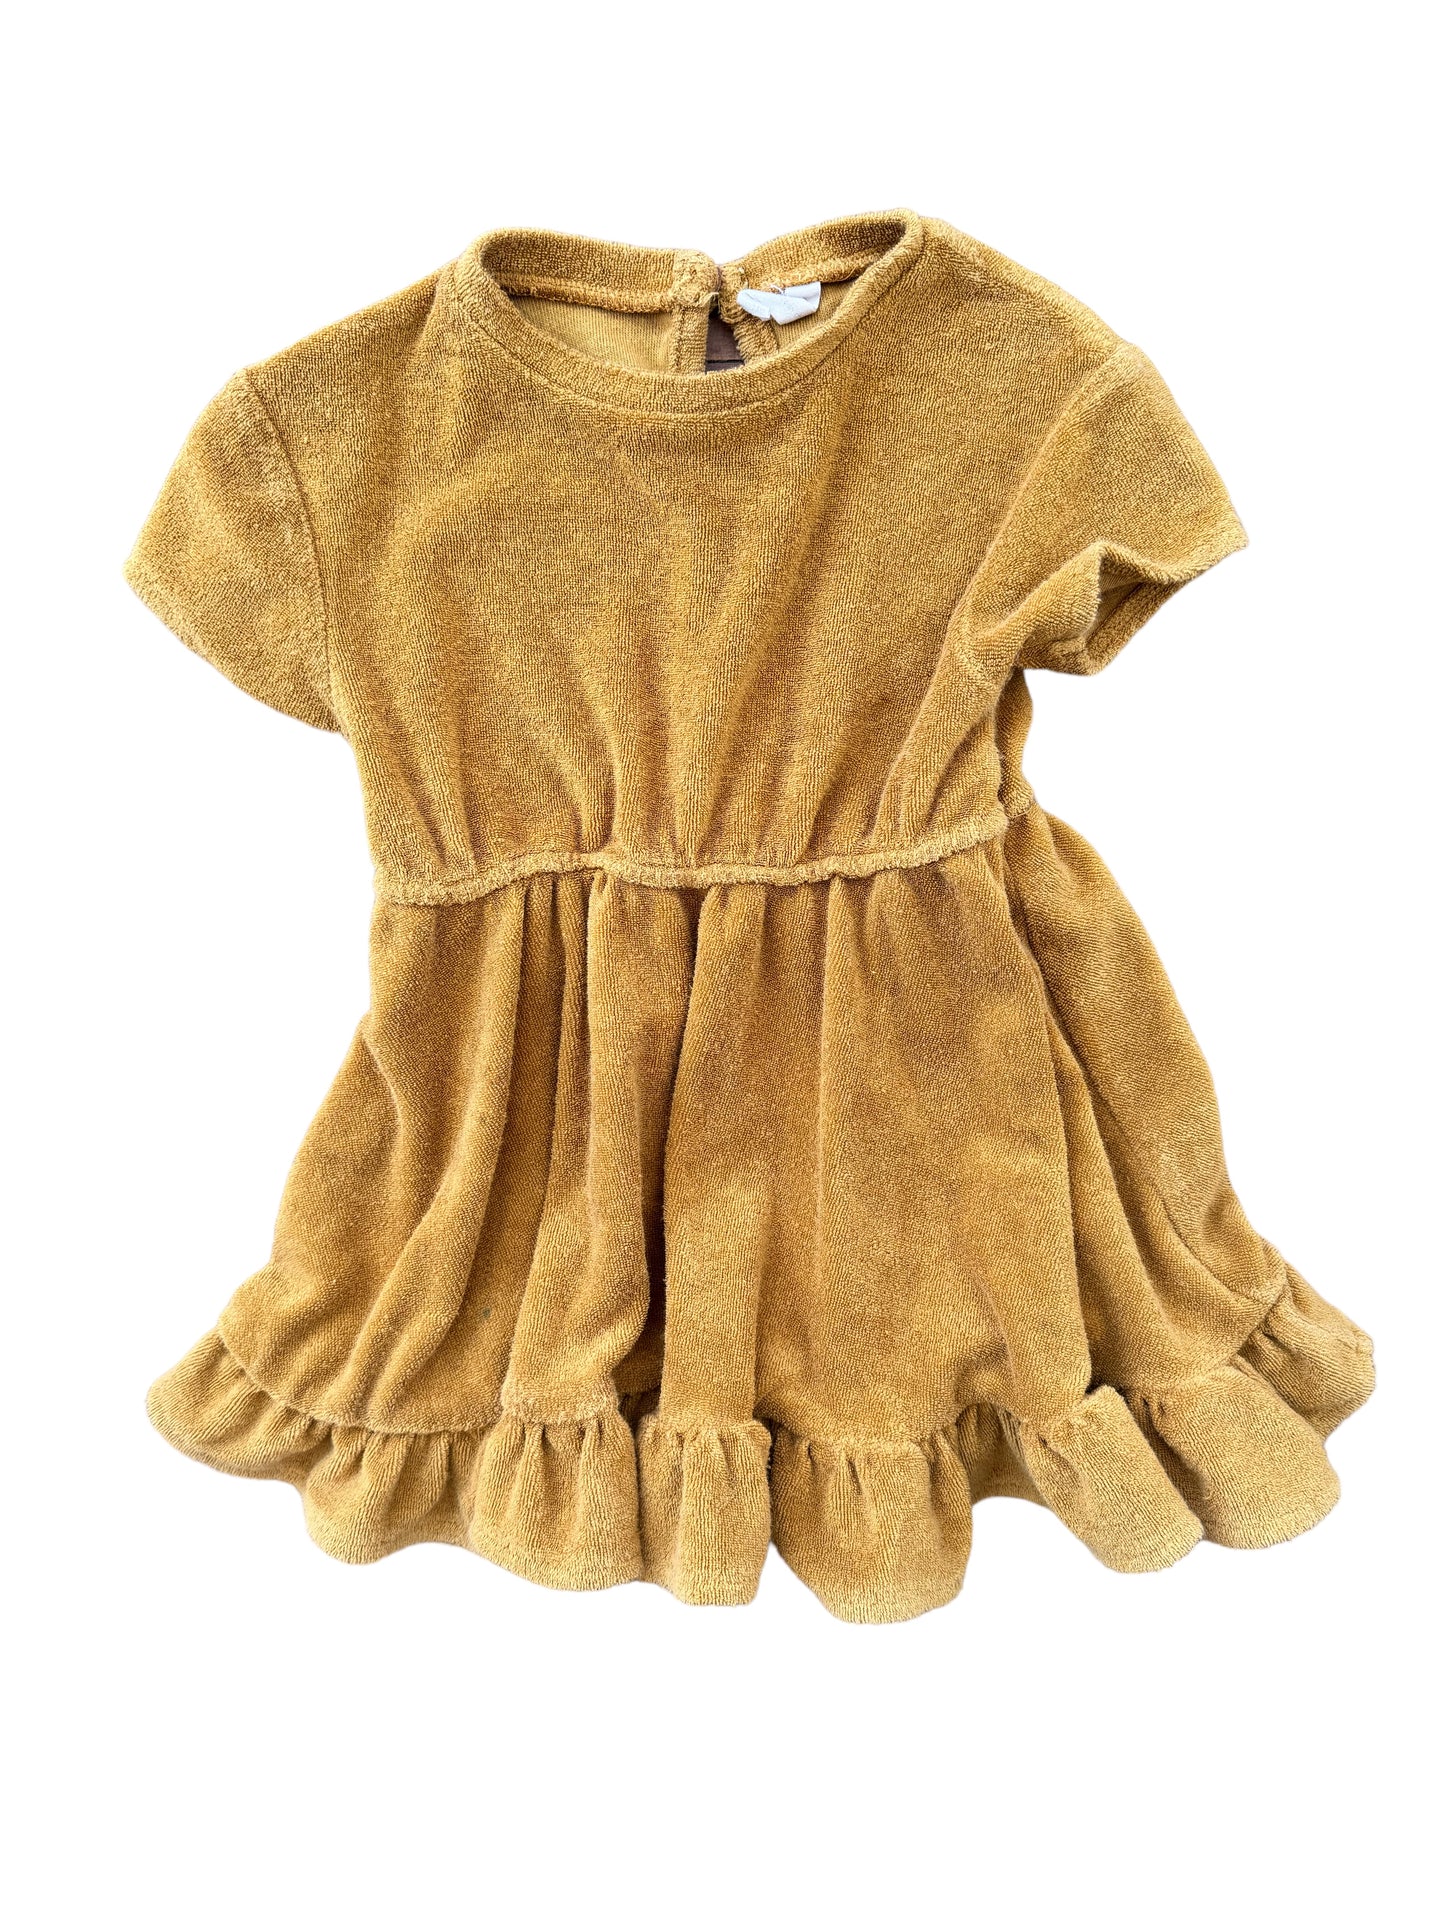 Quincy Mae dress | size : 12-24 months | GUC